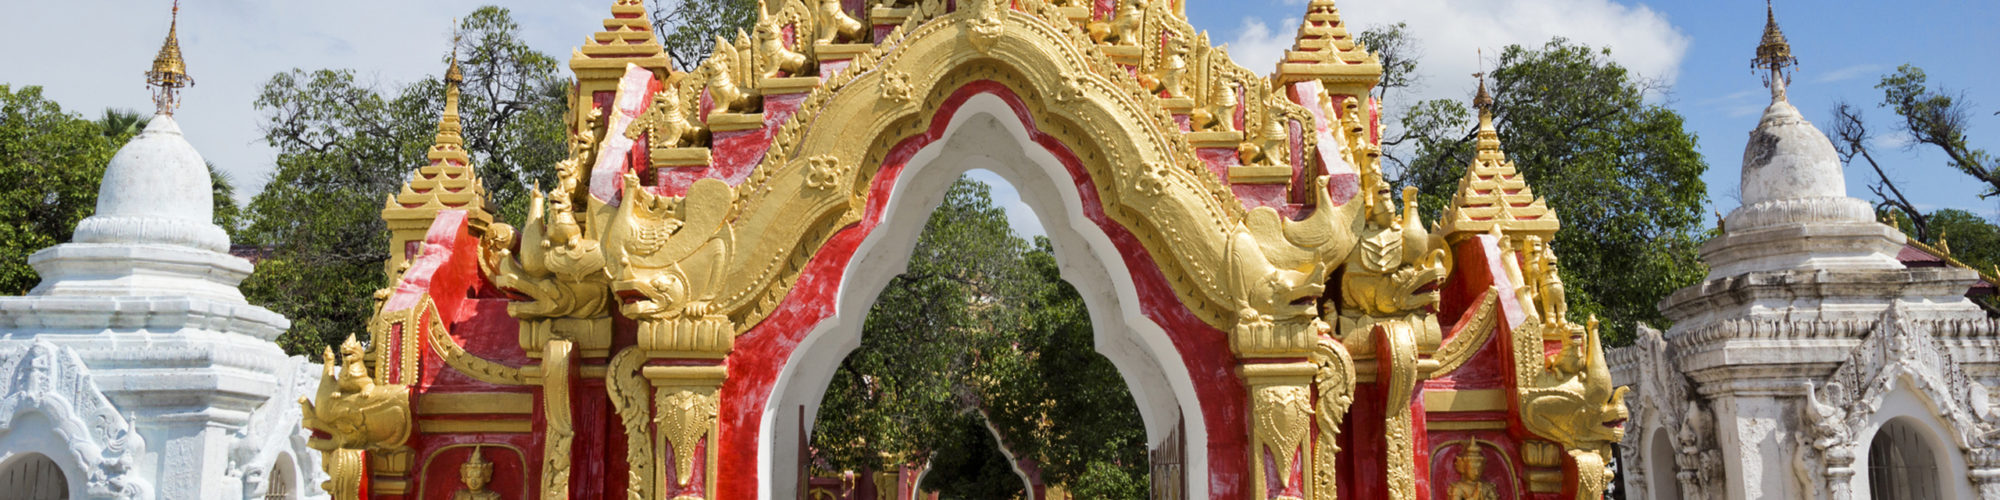 Mandalay travel agents packages deals